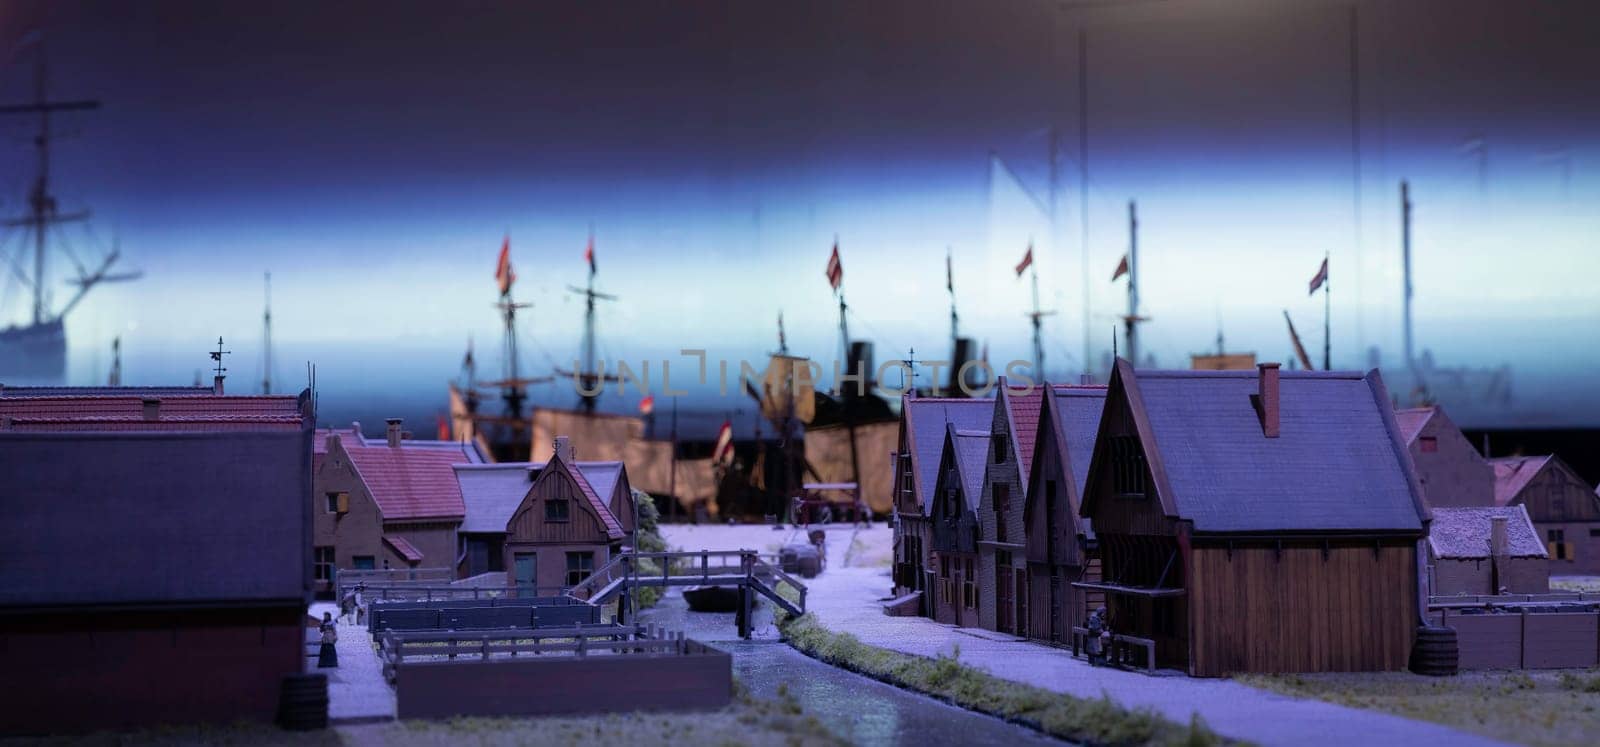 model of the island of texel from the old days with the fishermen's cottages and fishing fleet